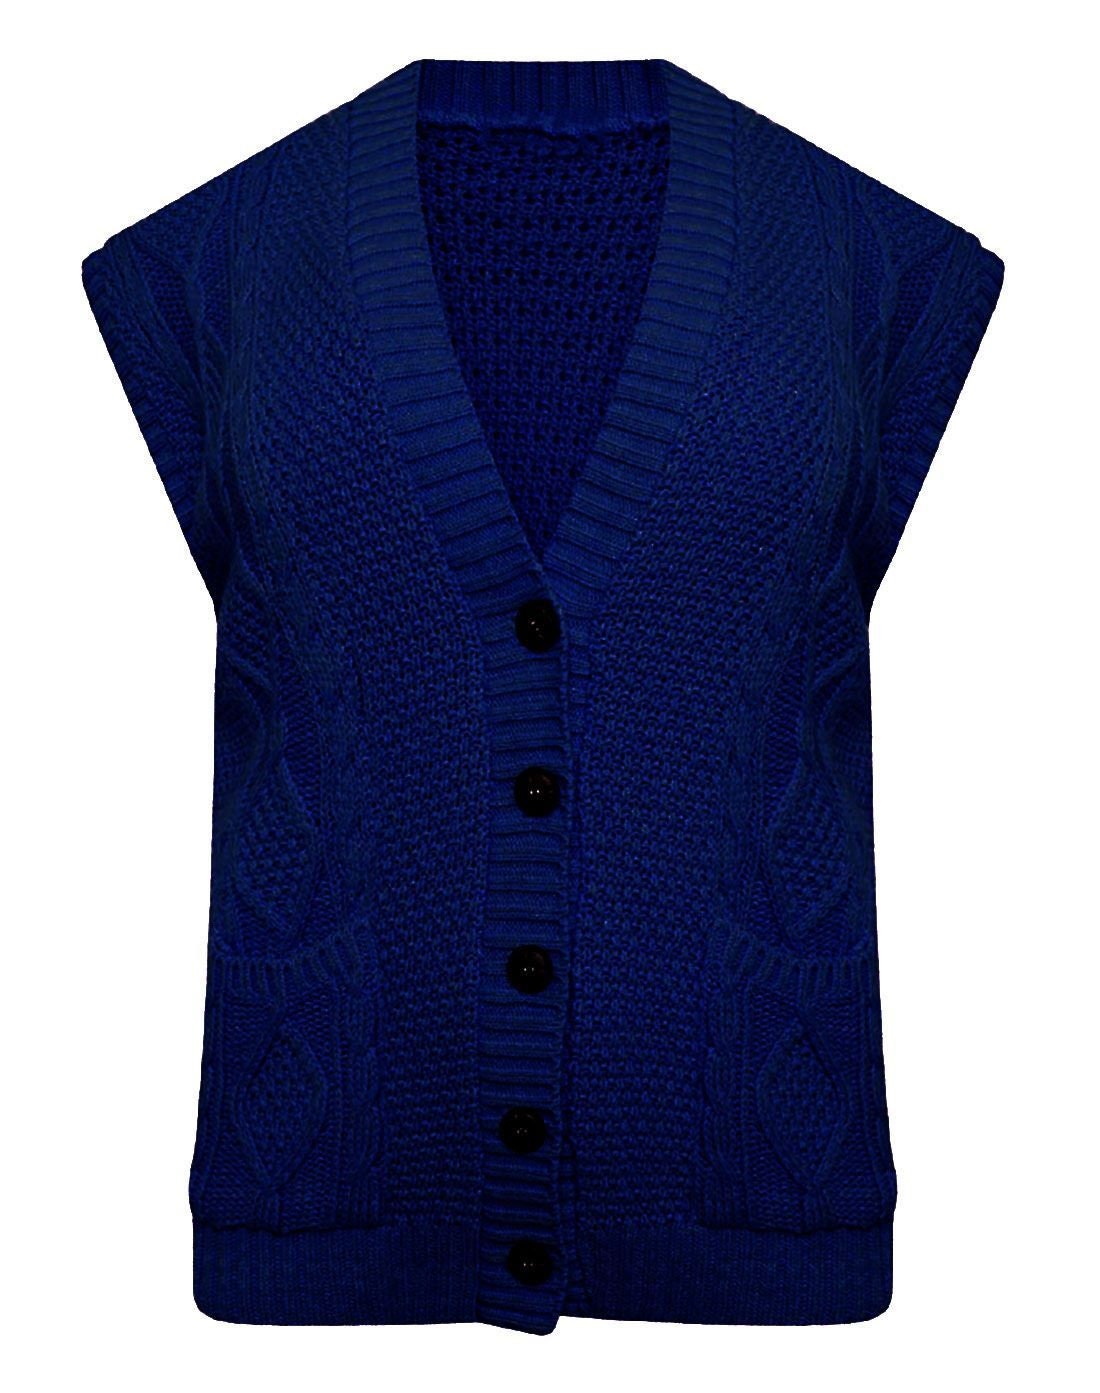 Ladies Cable Knitted Button Down Grandad Cardigan Womens Sleeveless ...